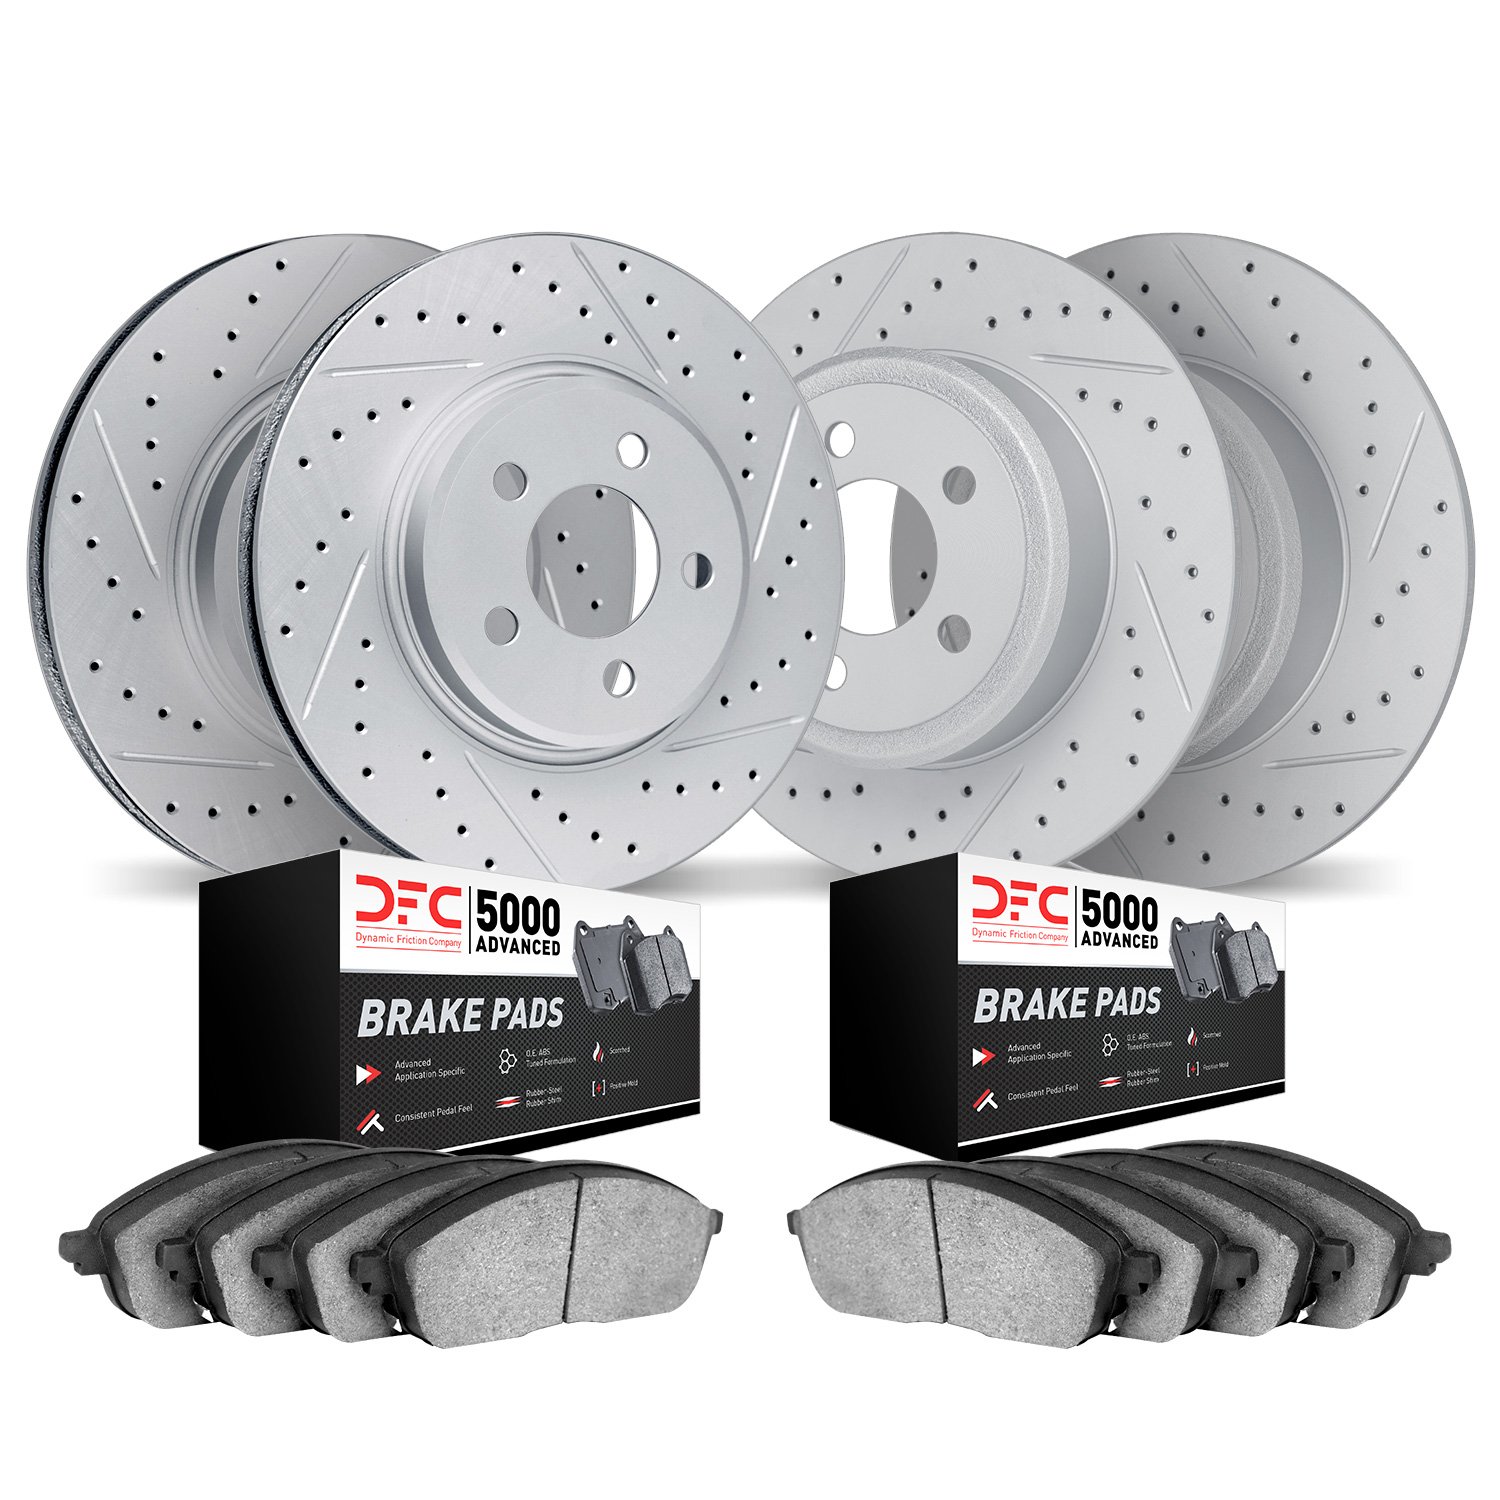 2504-56008 Geoperformance Drilled/Slotted Rotors w/5000 Advanced Brake Pads Kit, 1998-2002 Ford/Lincoln/Mercury/Mazda, Position: